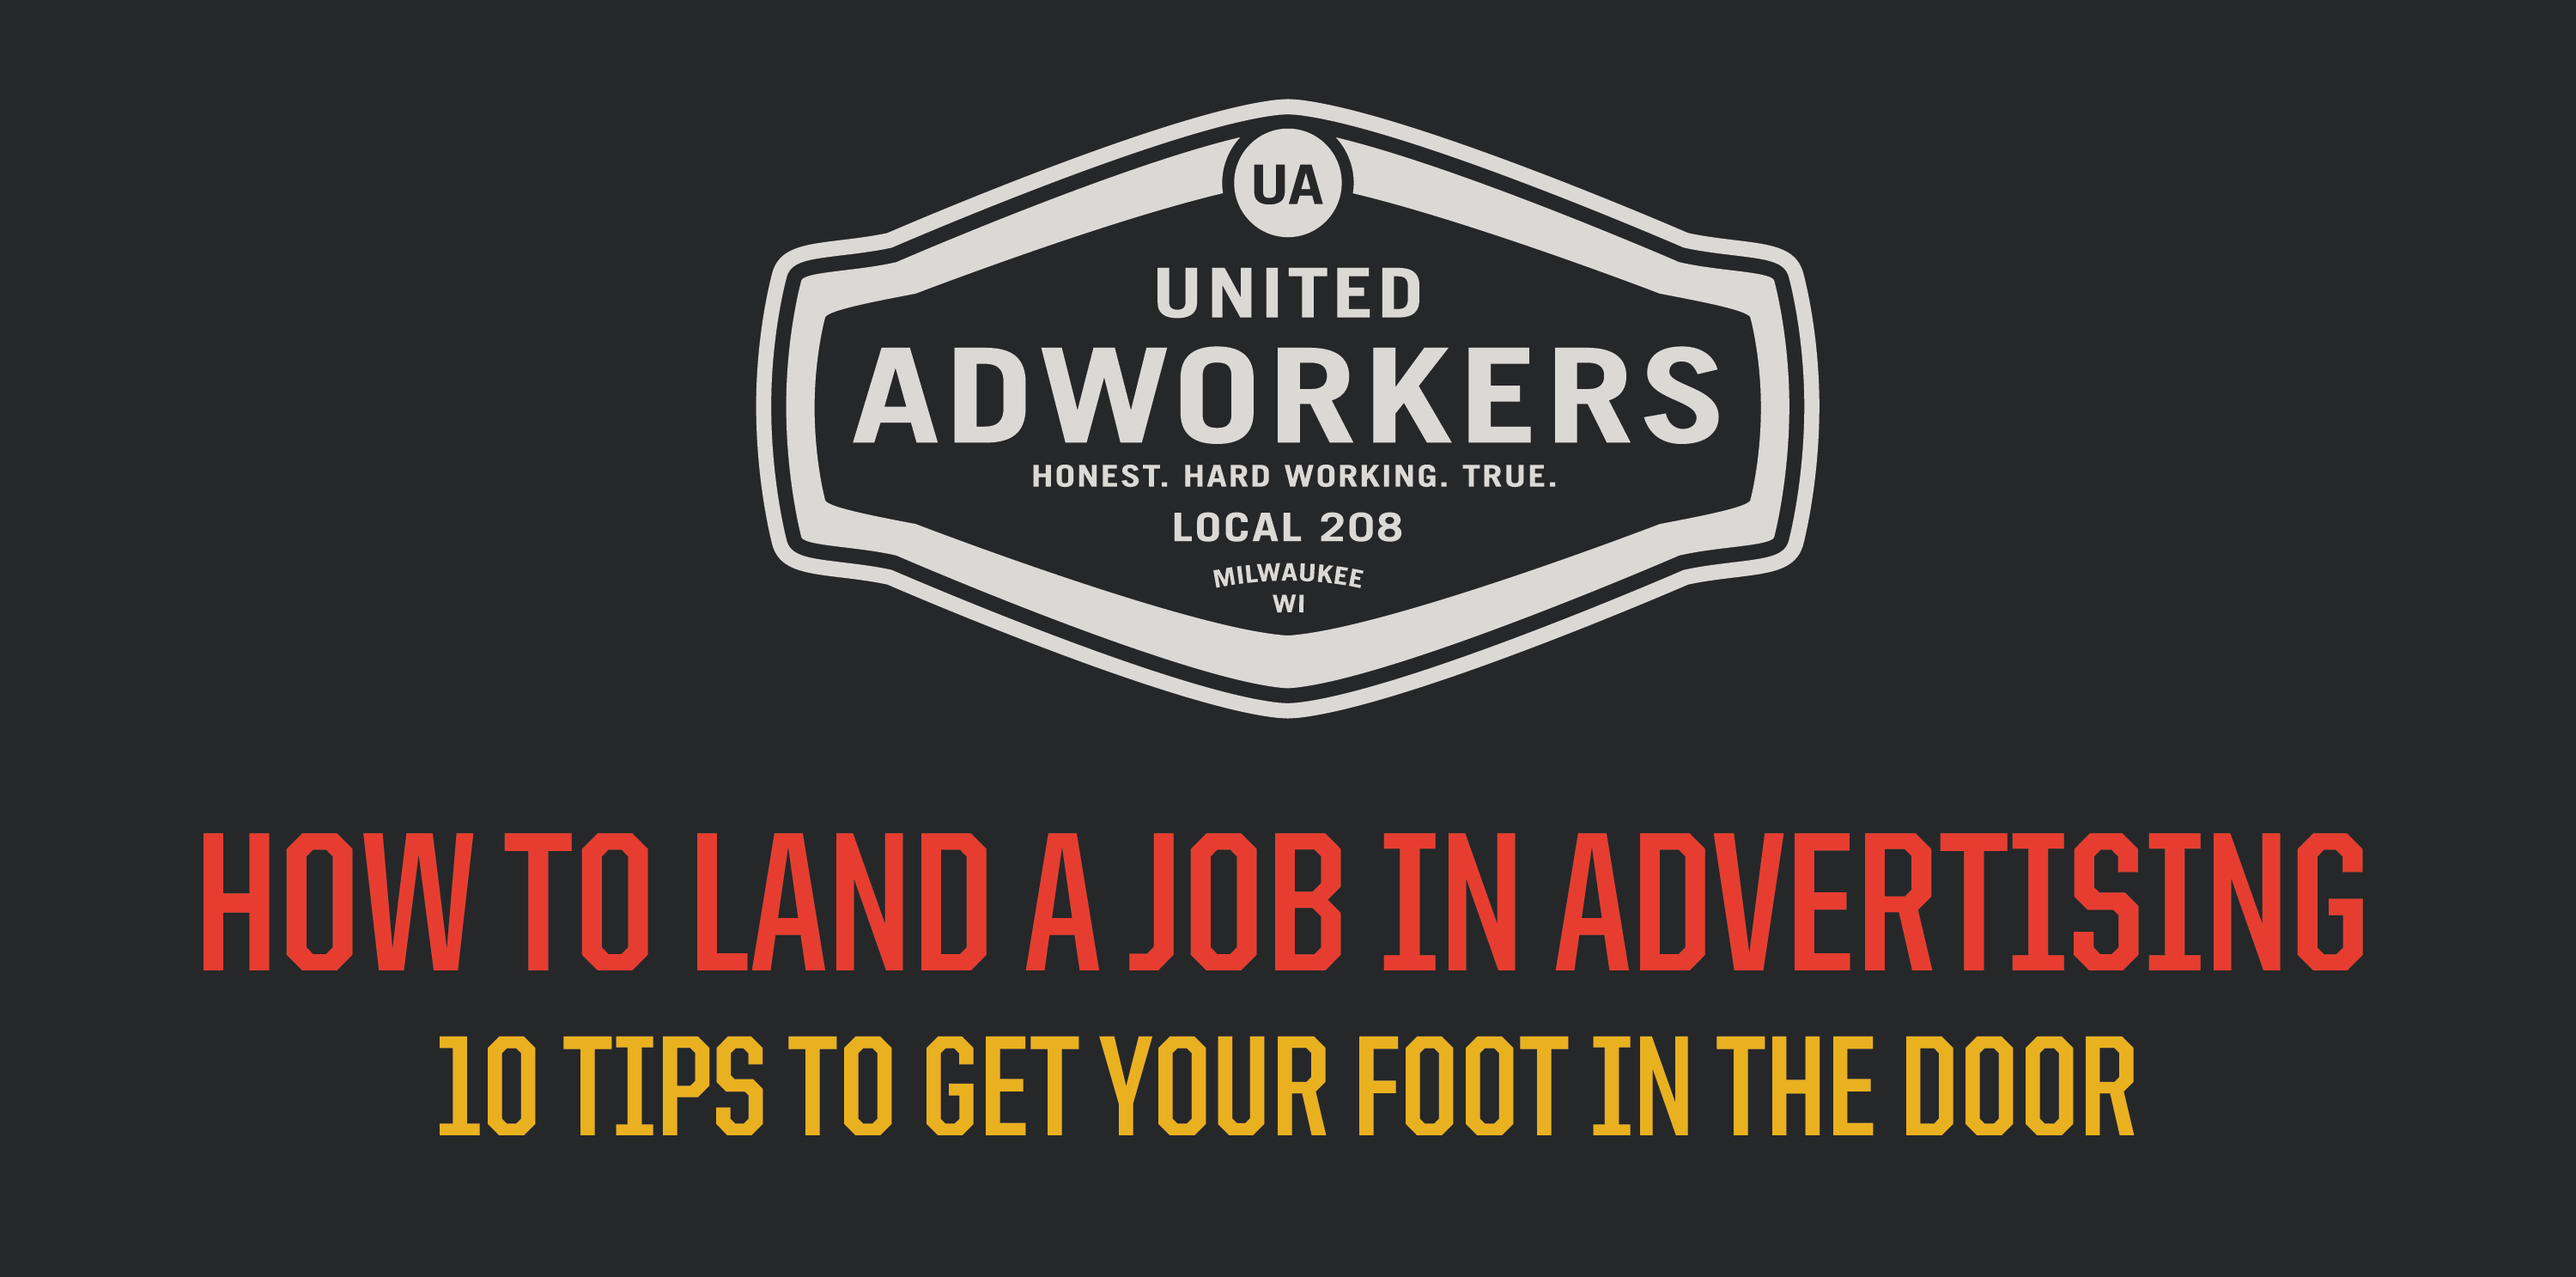 How to Land a Job in Advertising